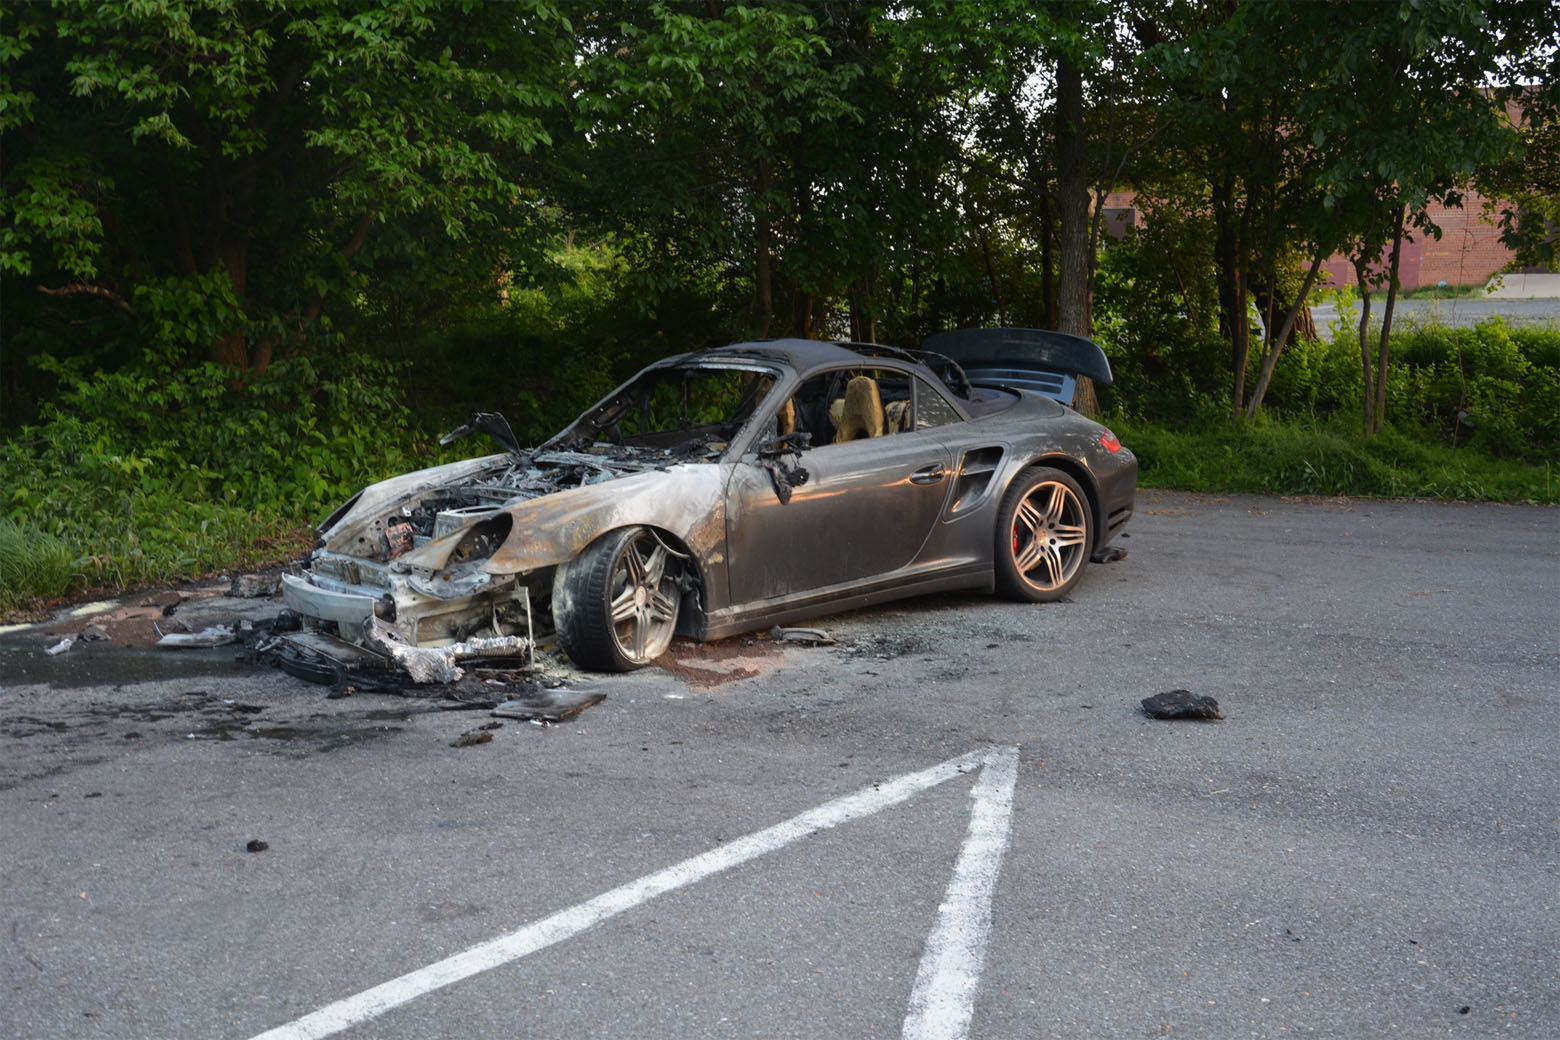 The blue Porsche belonging to Amy Savopoulos was driven from the family's house after the mansion was set ablaze. It was later found burning in the back of a church parking lot in New Carrollton, Maryland. Inside, investigators found a construction vest with Daron Wint's DNA on it. (Courtesy U.S. Attorney's Office for D.C.)